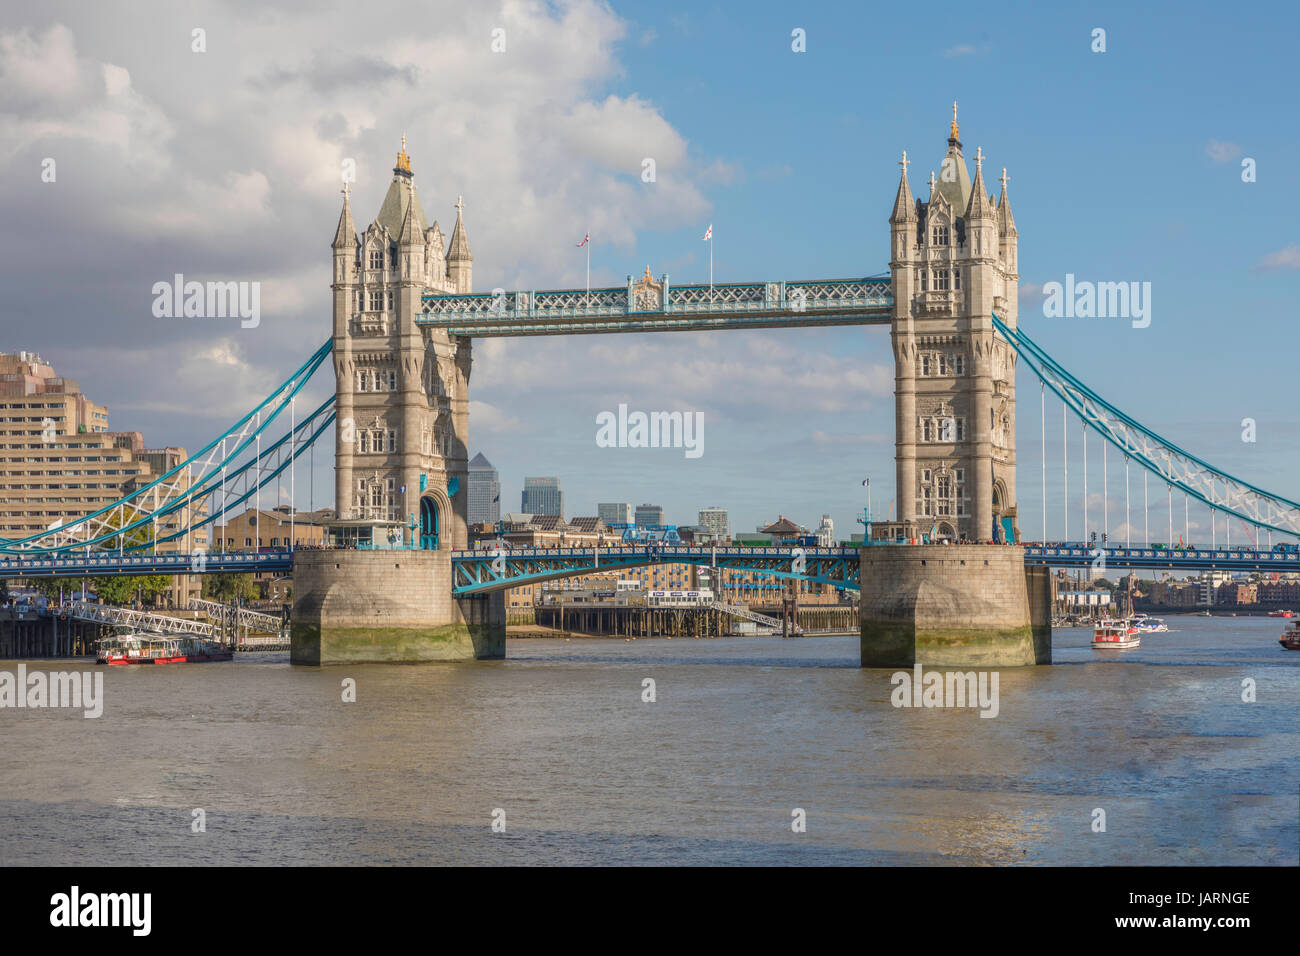 London, UK-April 13, 2017: Tower Bridge in London, famous and iconic tourist attraction. Stock Photo